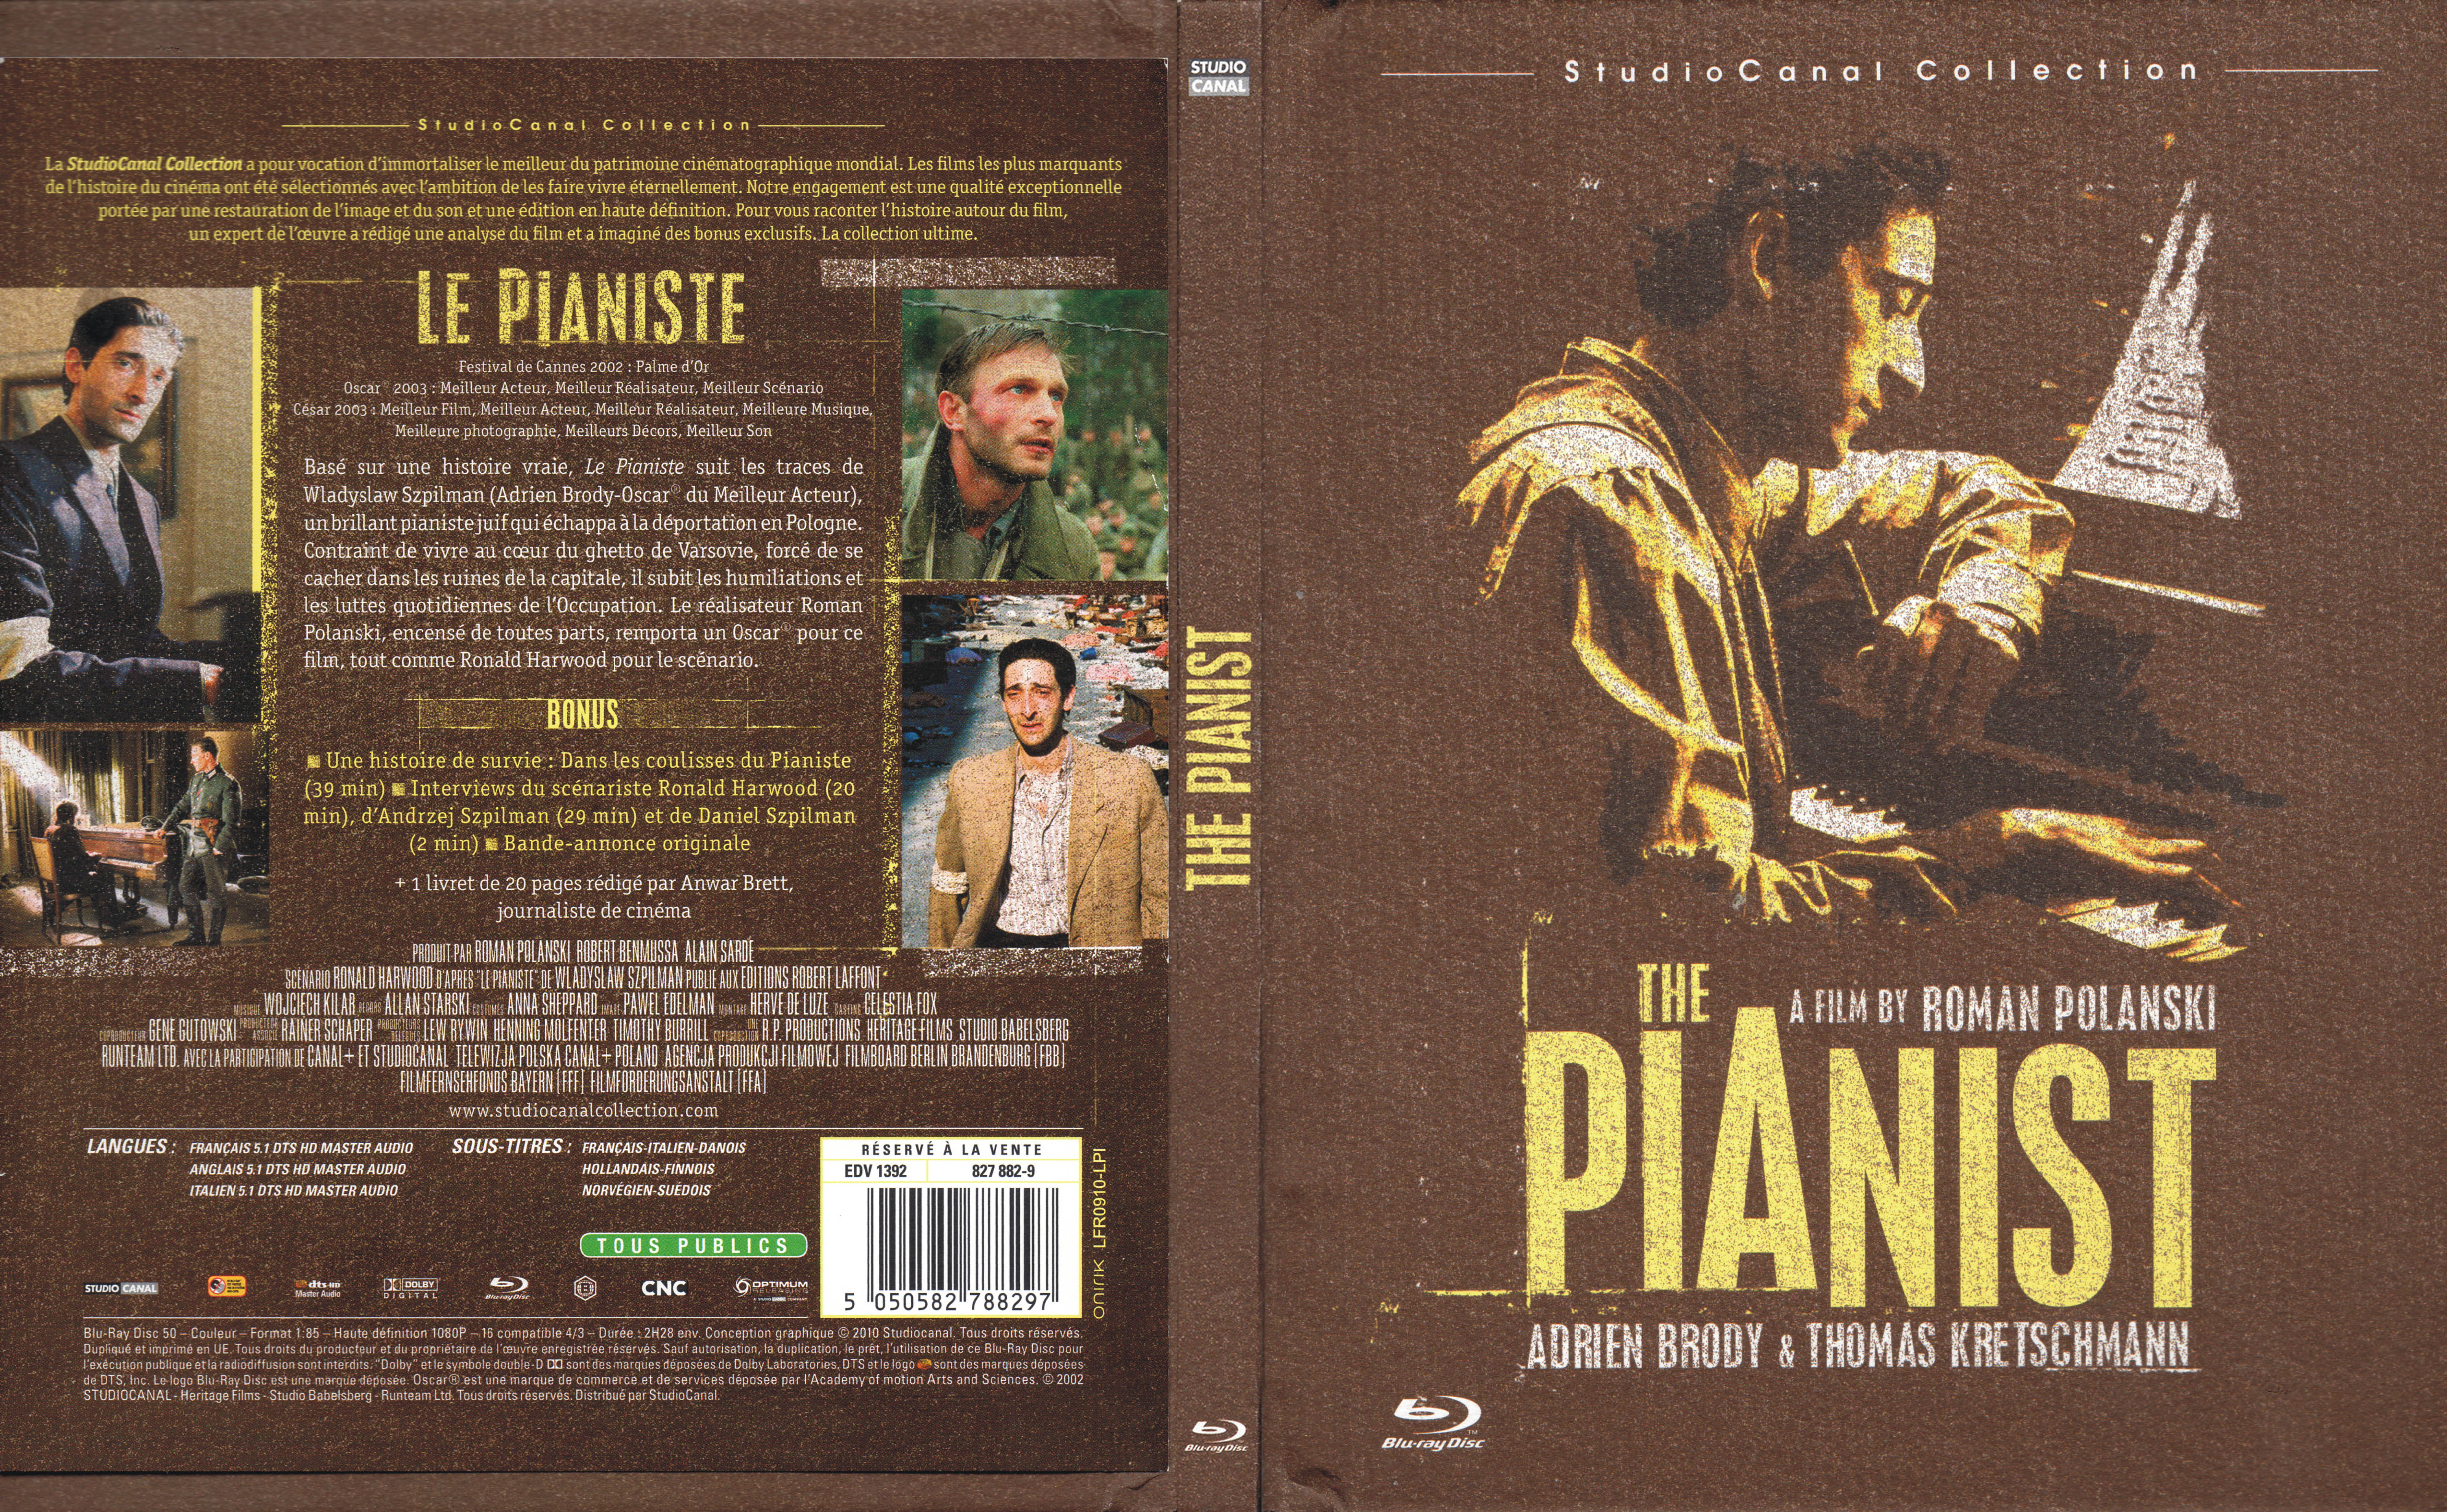 Jaquette DVD Le pianiste (BLU-RAY) v2